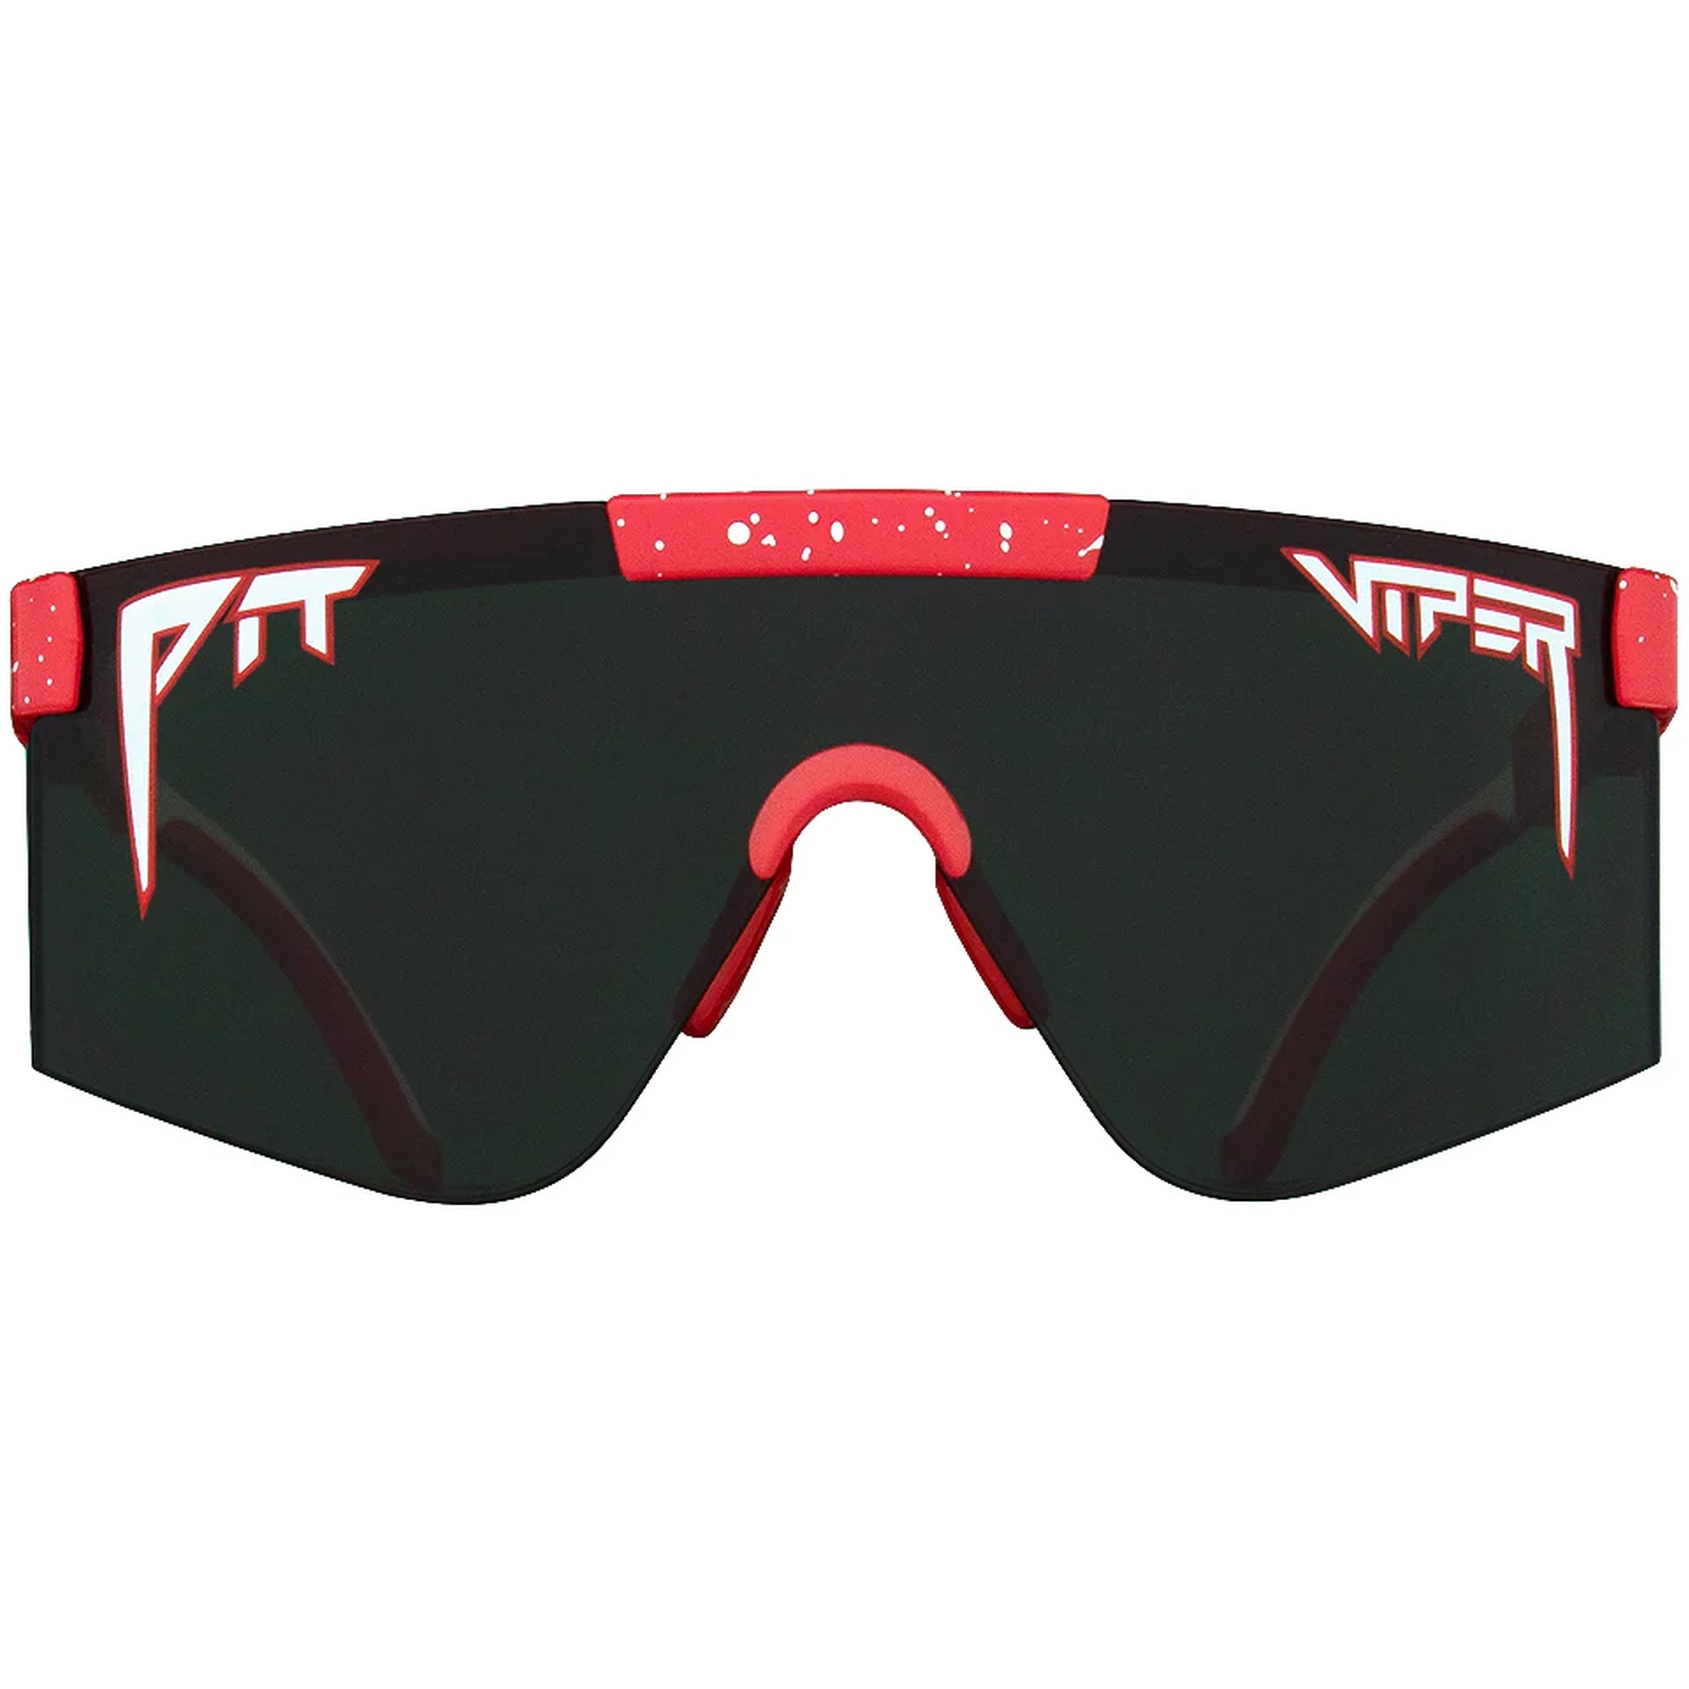 Picture of Pit Viper The 2000s Glasses - The Responder / Smoke